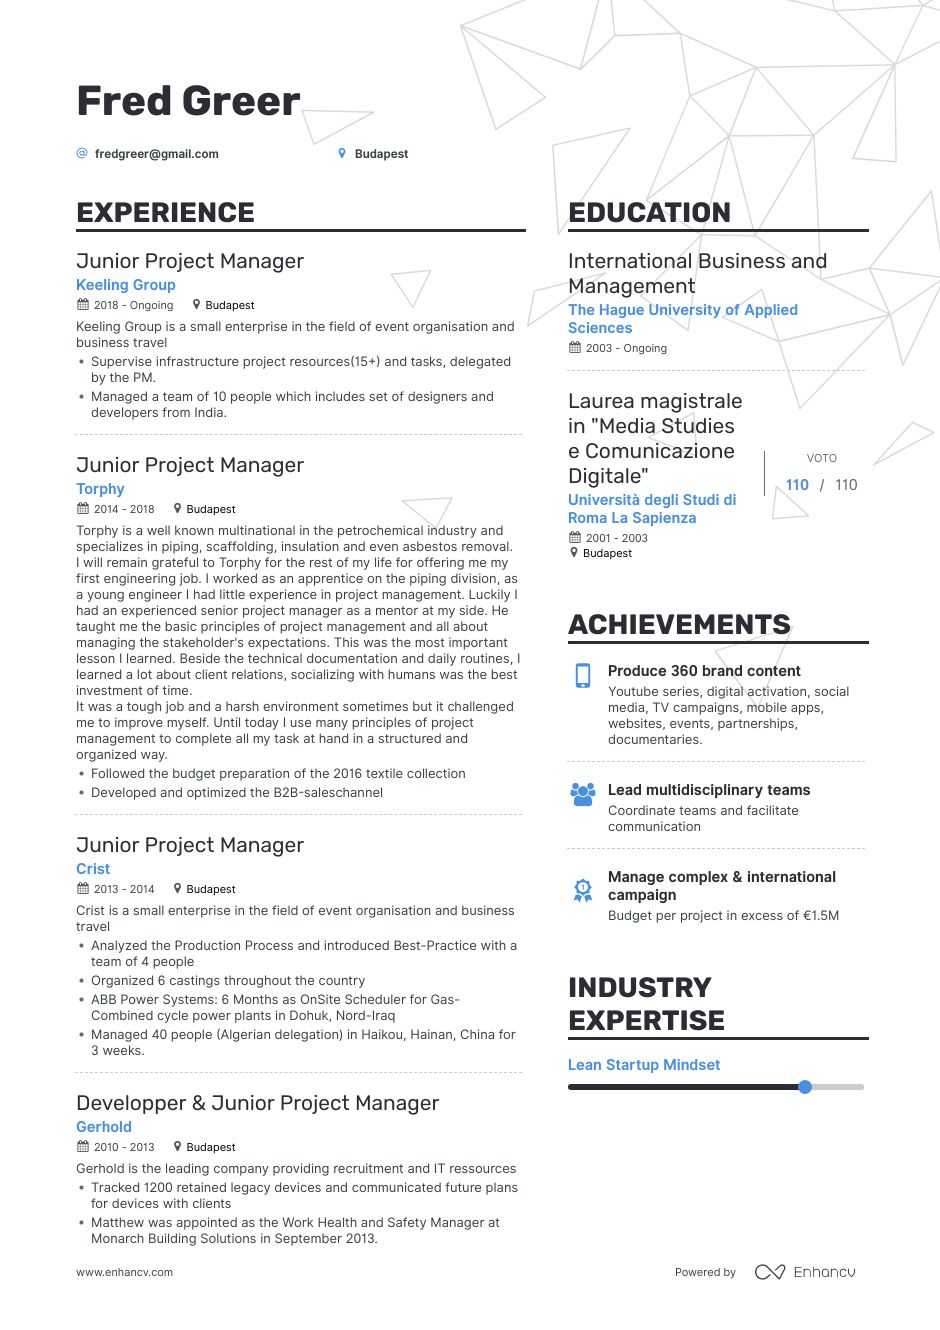 Junior Project Manager Resume Example and guide for 2019